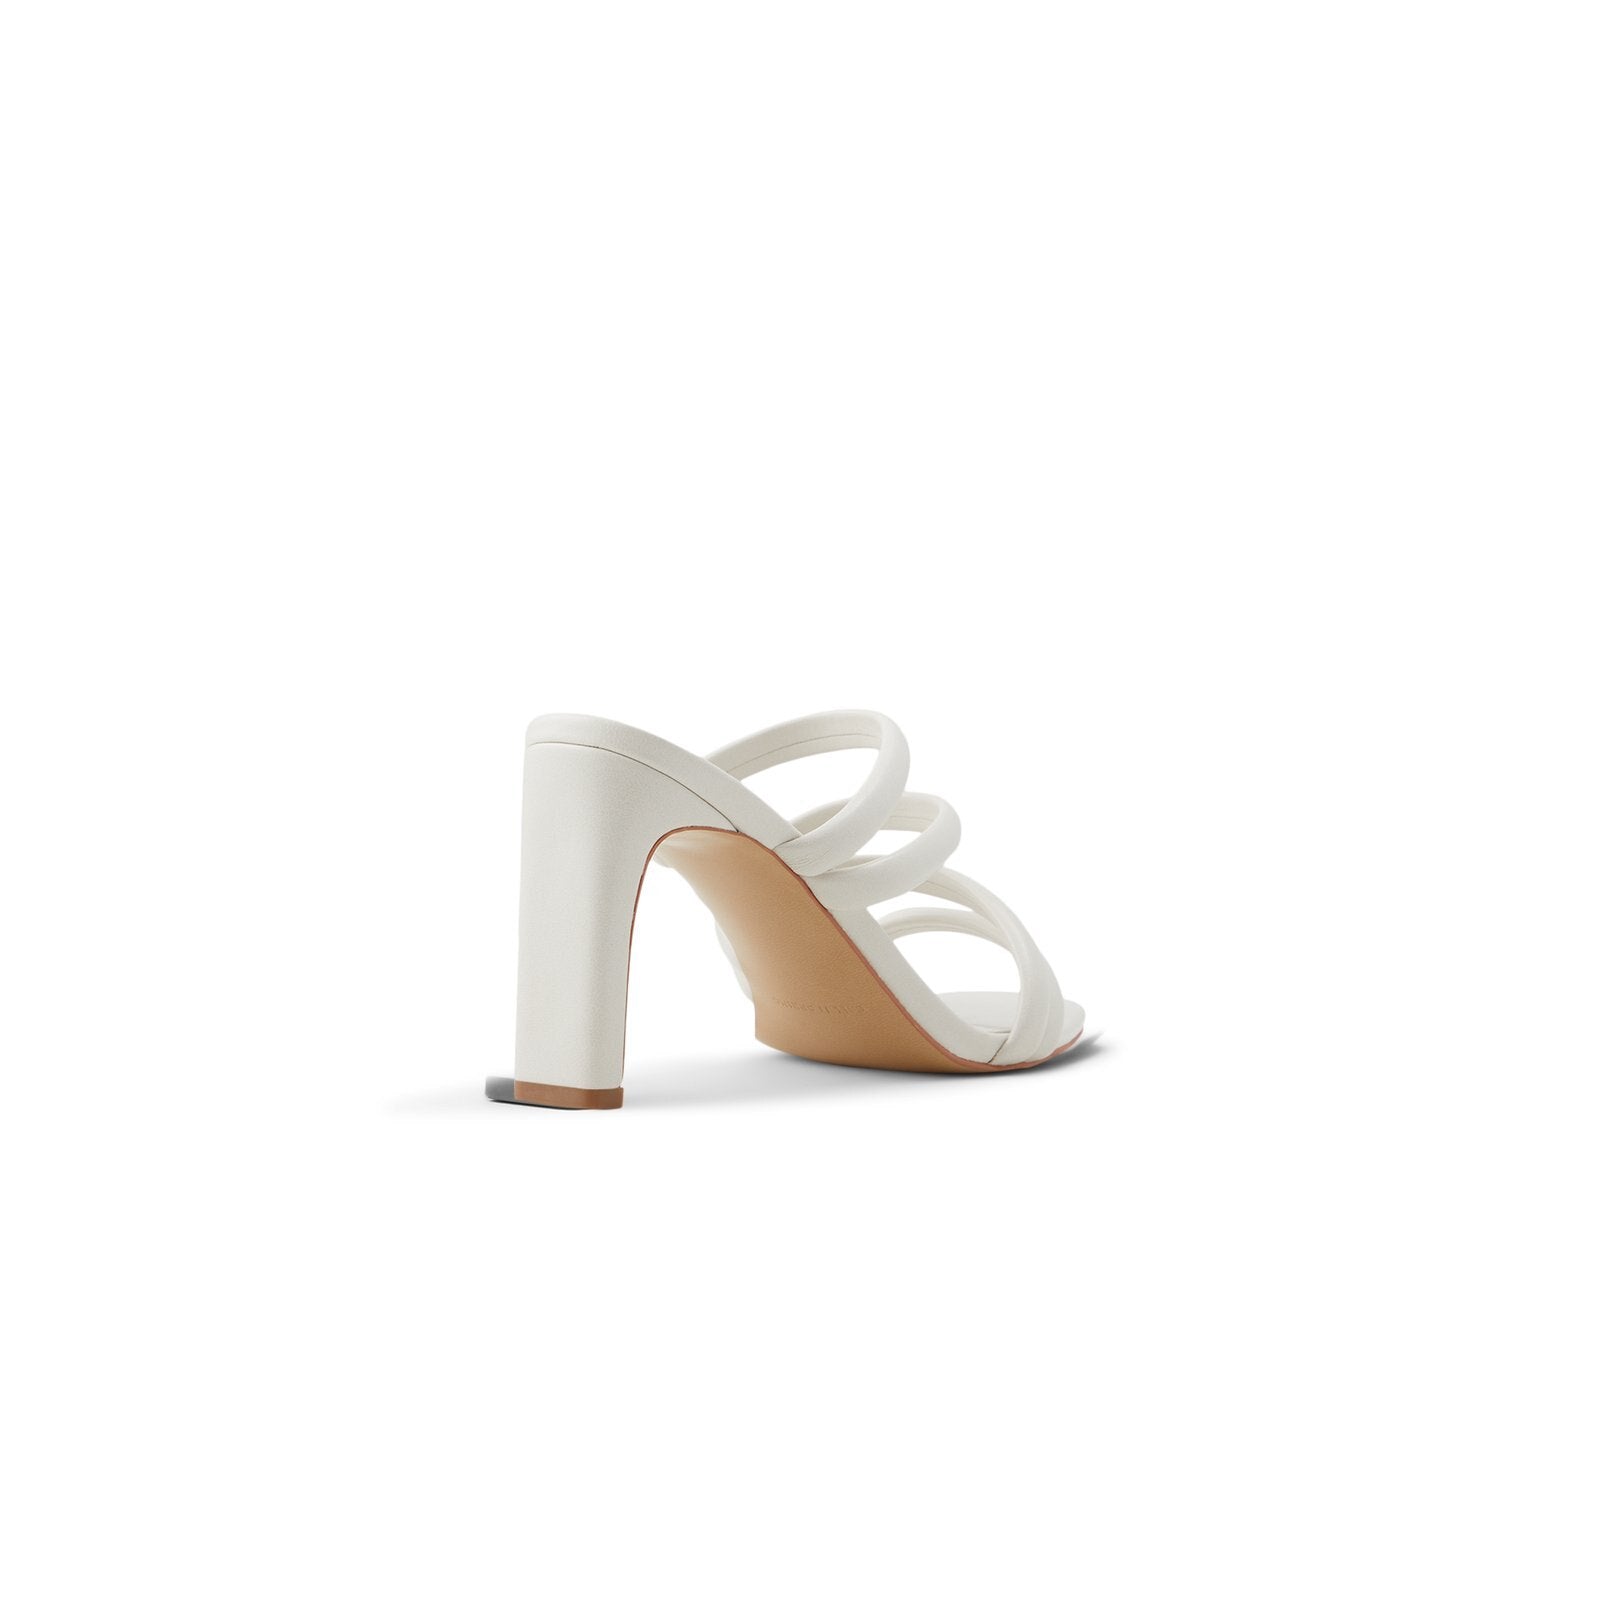 Cherie / Heeled Sandals Women Shoes - Ice - CALL IT SPRING KSA